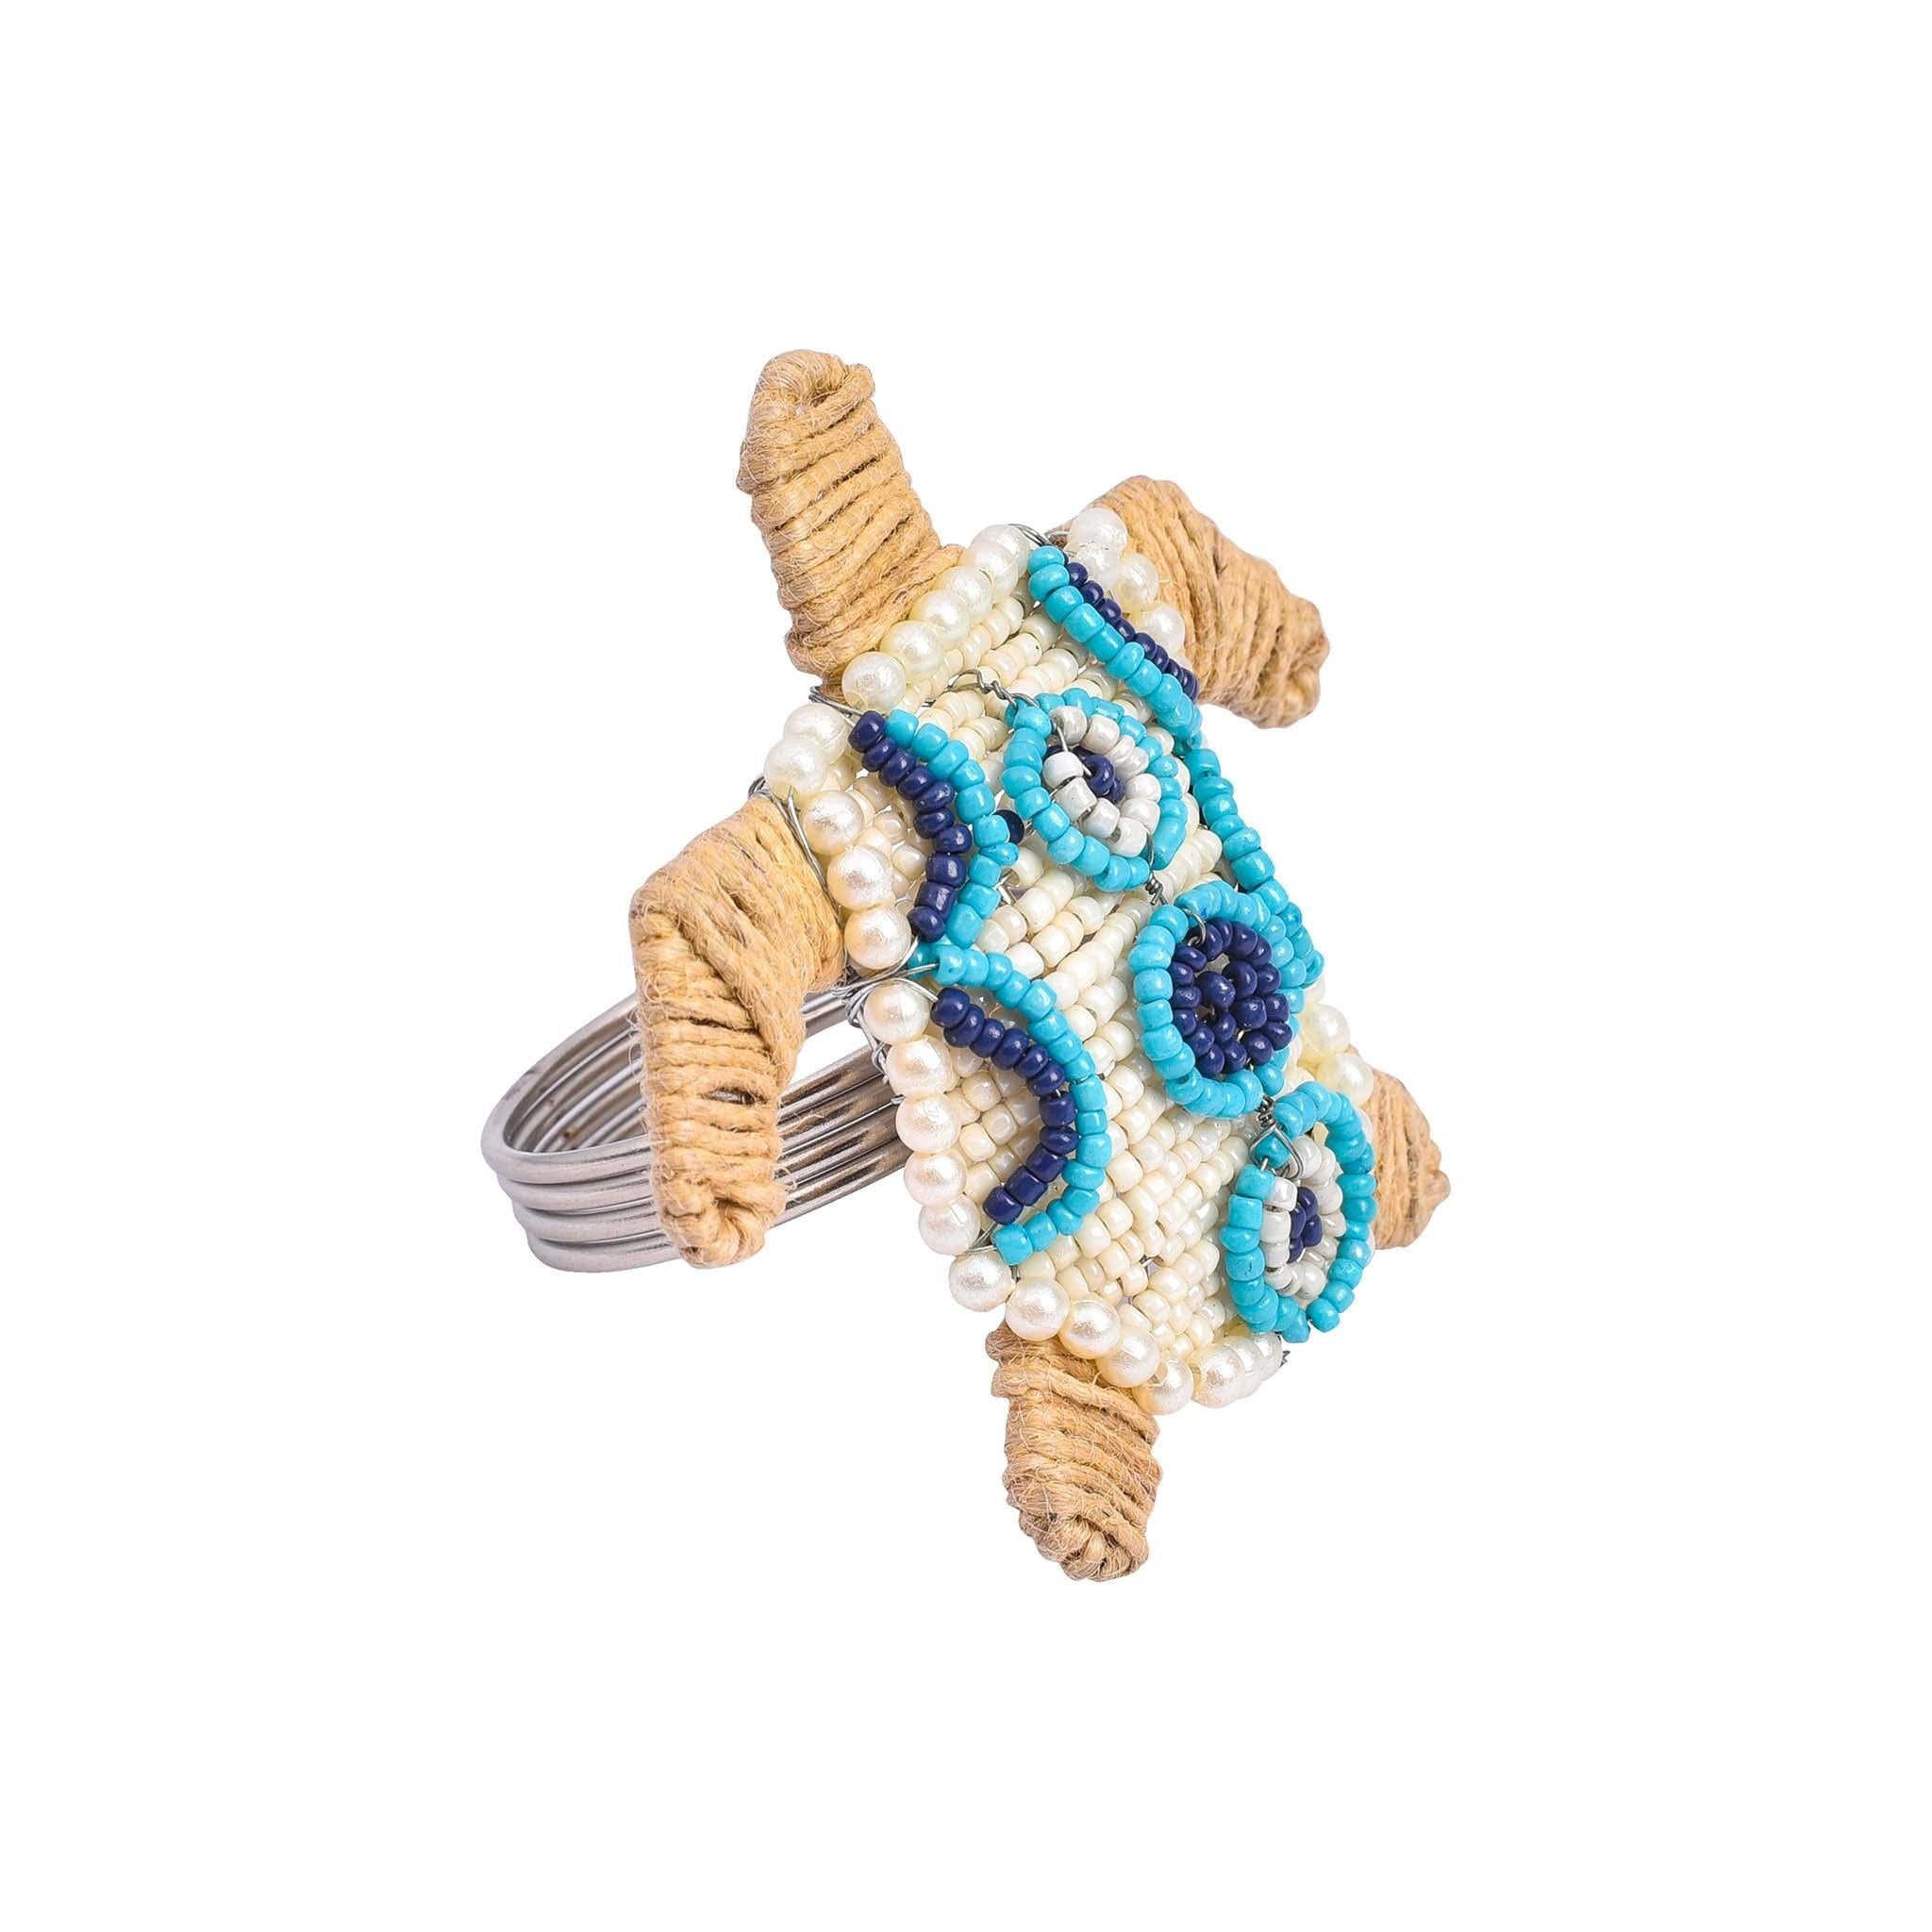 Turtley In Love Napkin Ring<br>Size: 3.25"x3"x2.25"<br>Set of 4<br>Color: Teal - Trunkin' USA